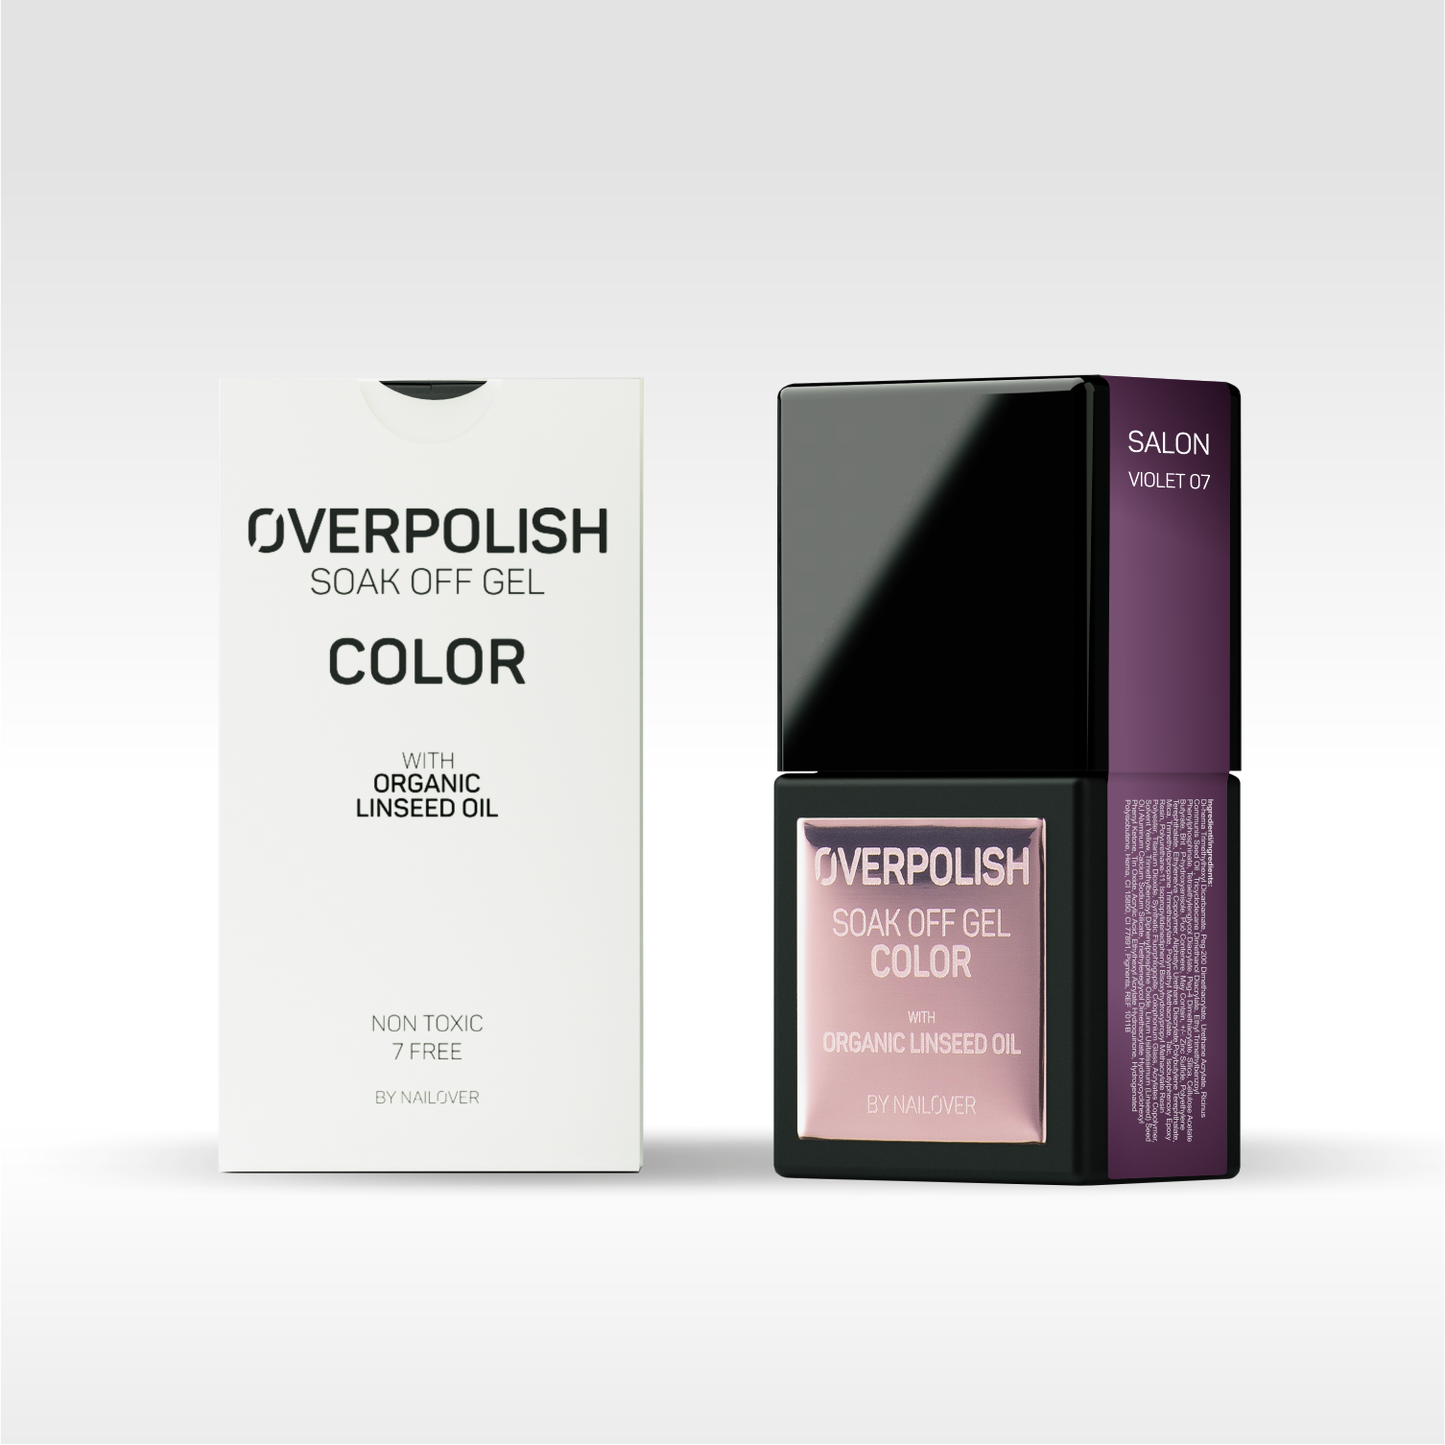 Overpolish Soak Off Gel Color - Violet Tones WITH ORGANIC LINSEED OIL